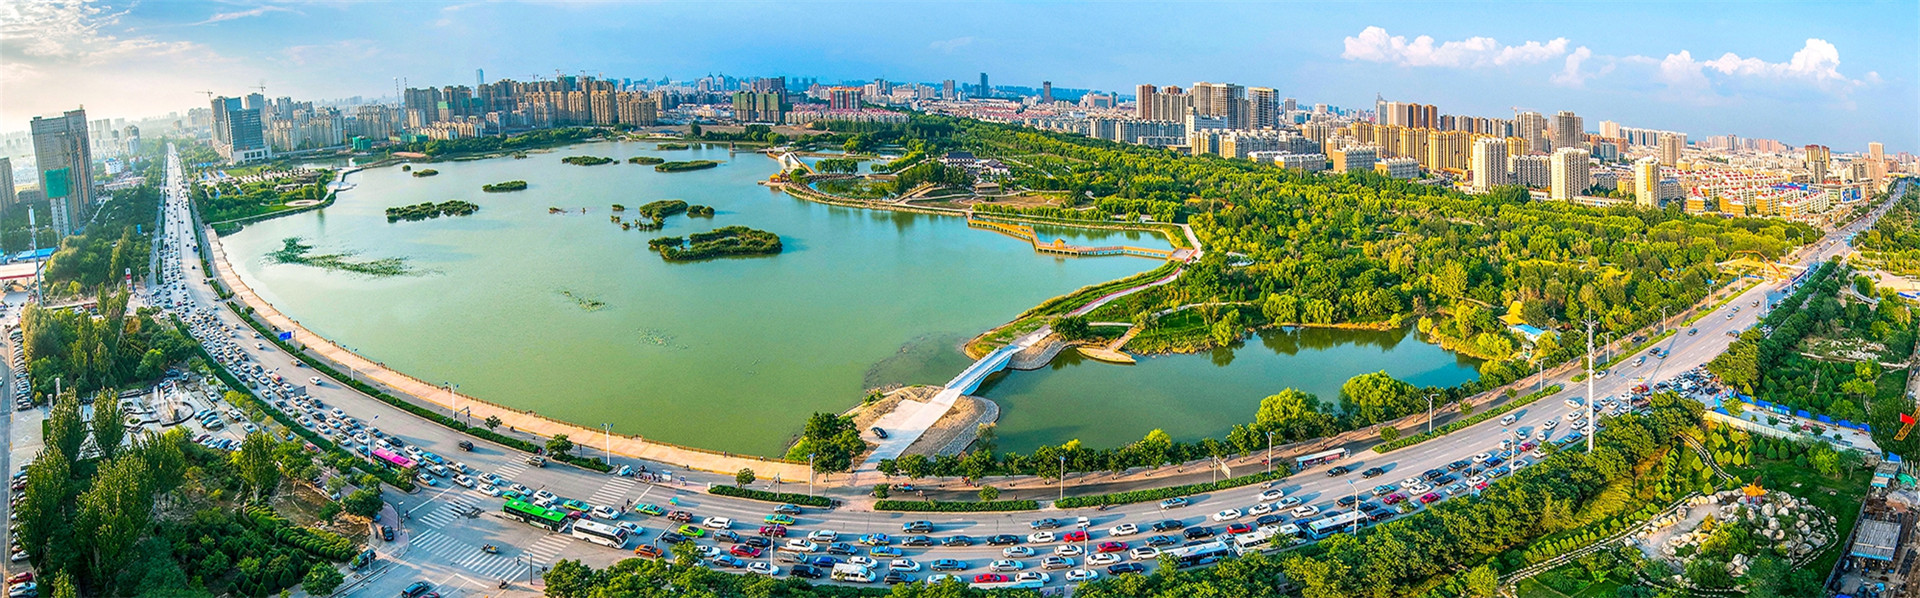 Overview of Yinchuan city